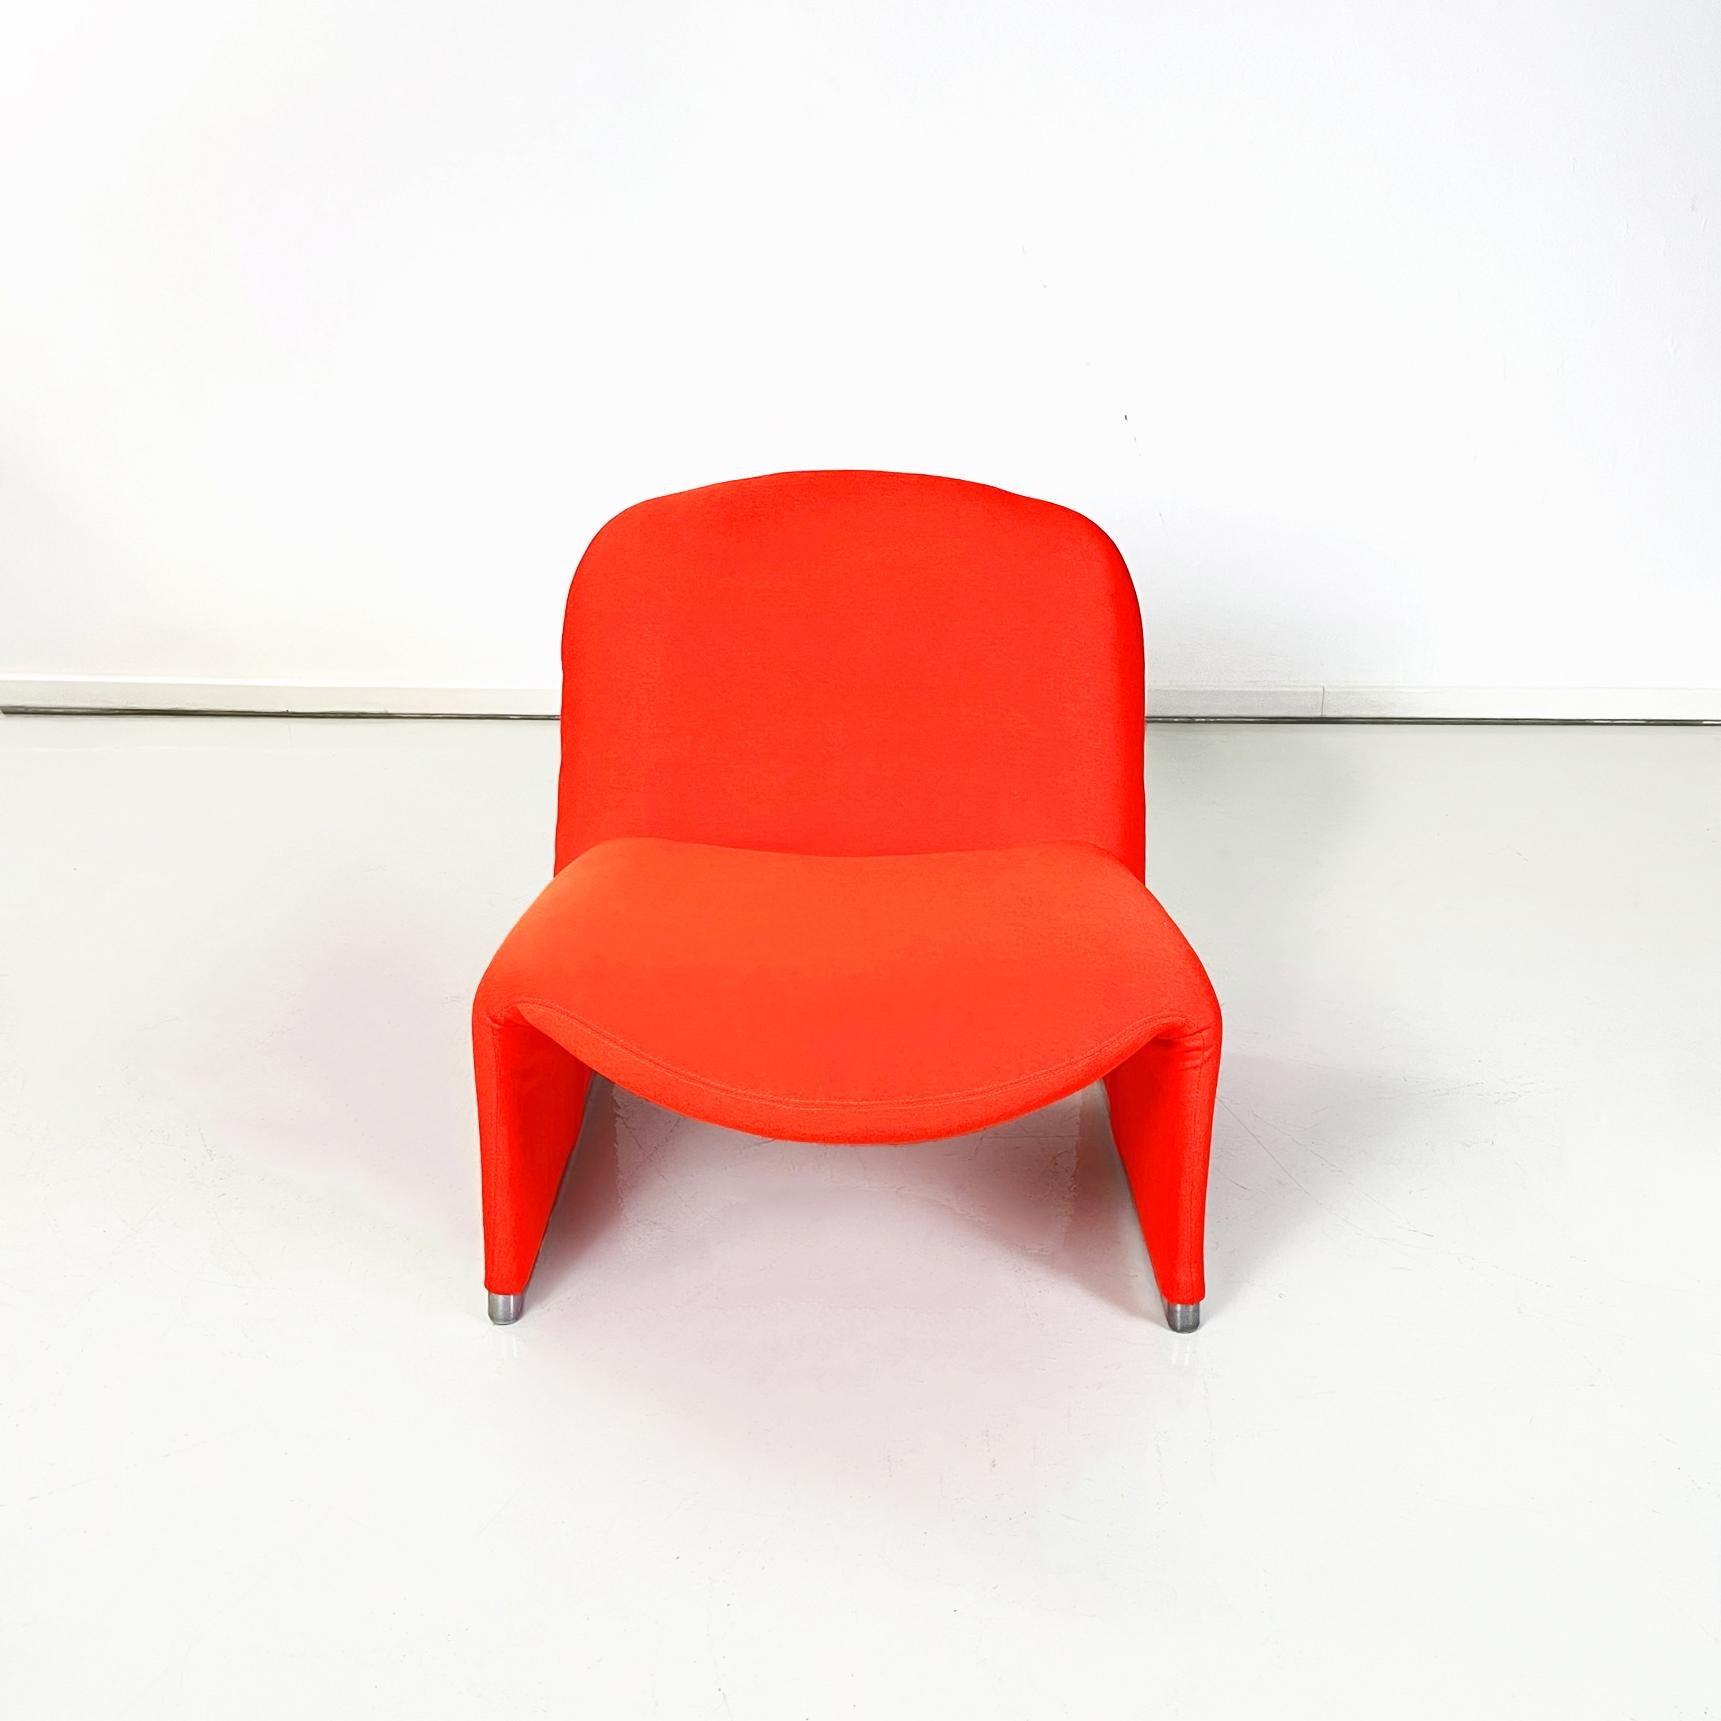 Mid-Century Modern Italian Modern Red Chairs Alky by Giancarlo Piretti for Anonima Castelli, 1970s For Sale